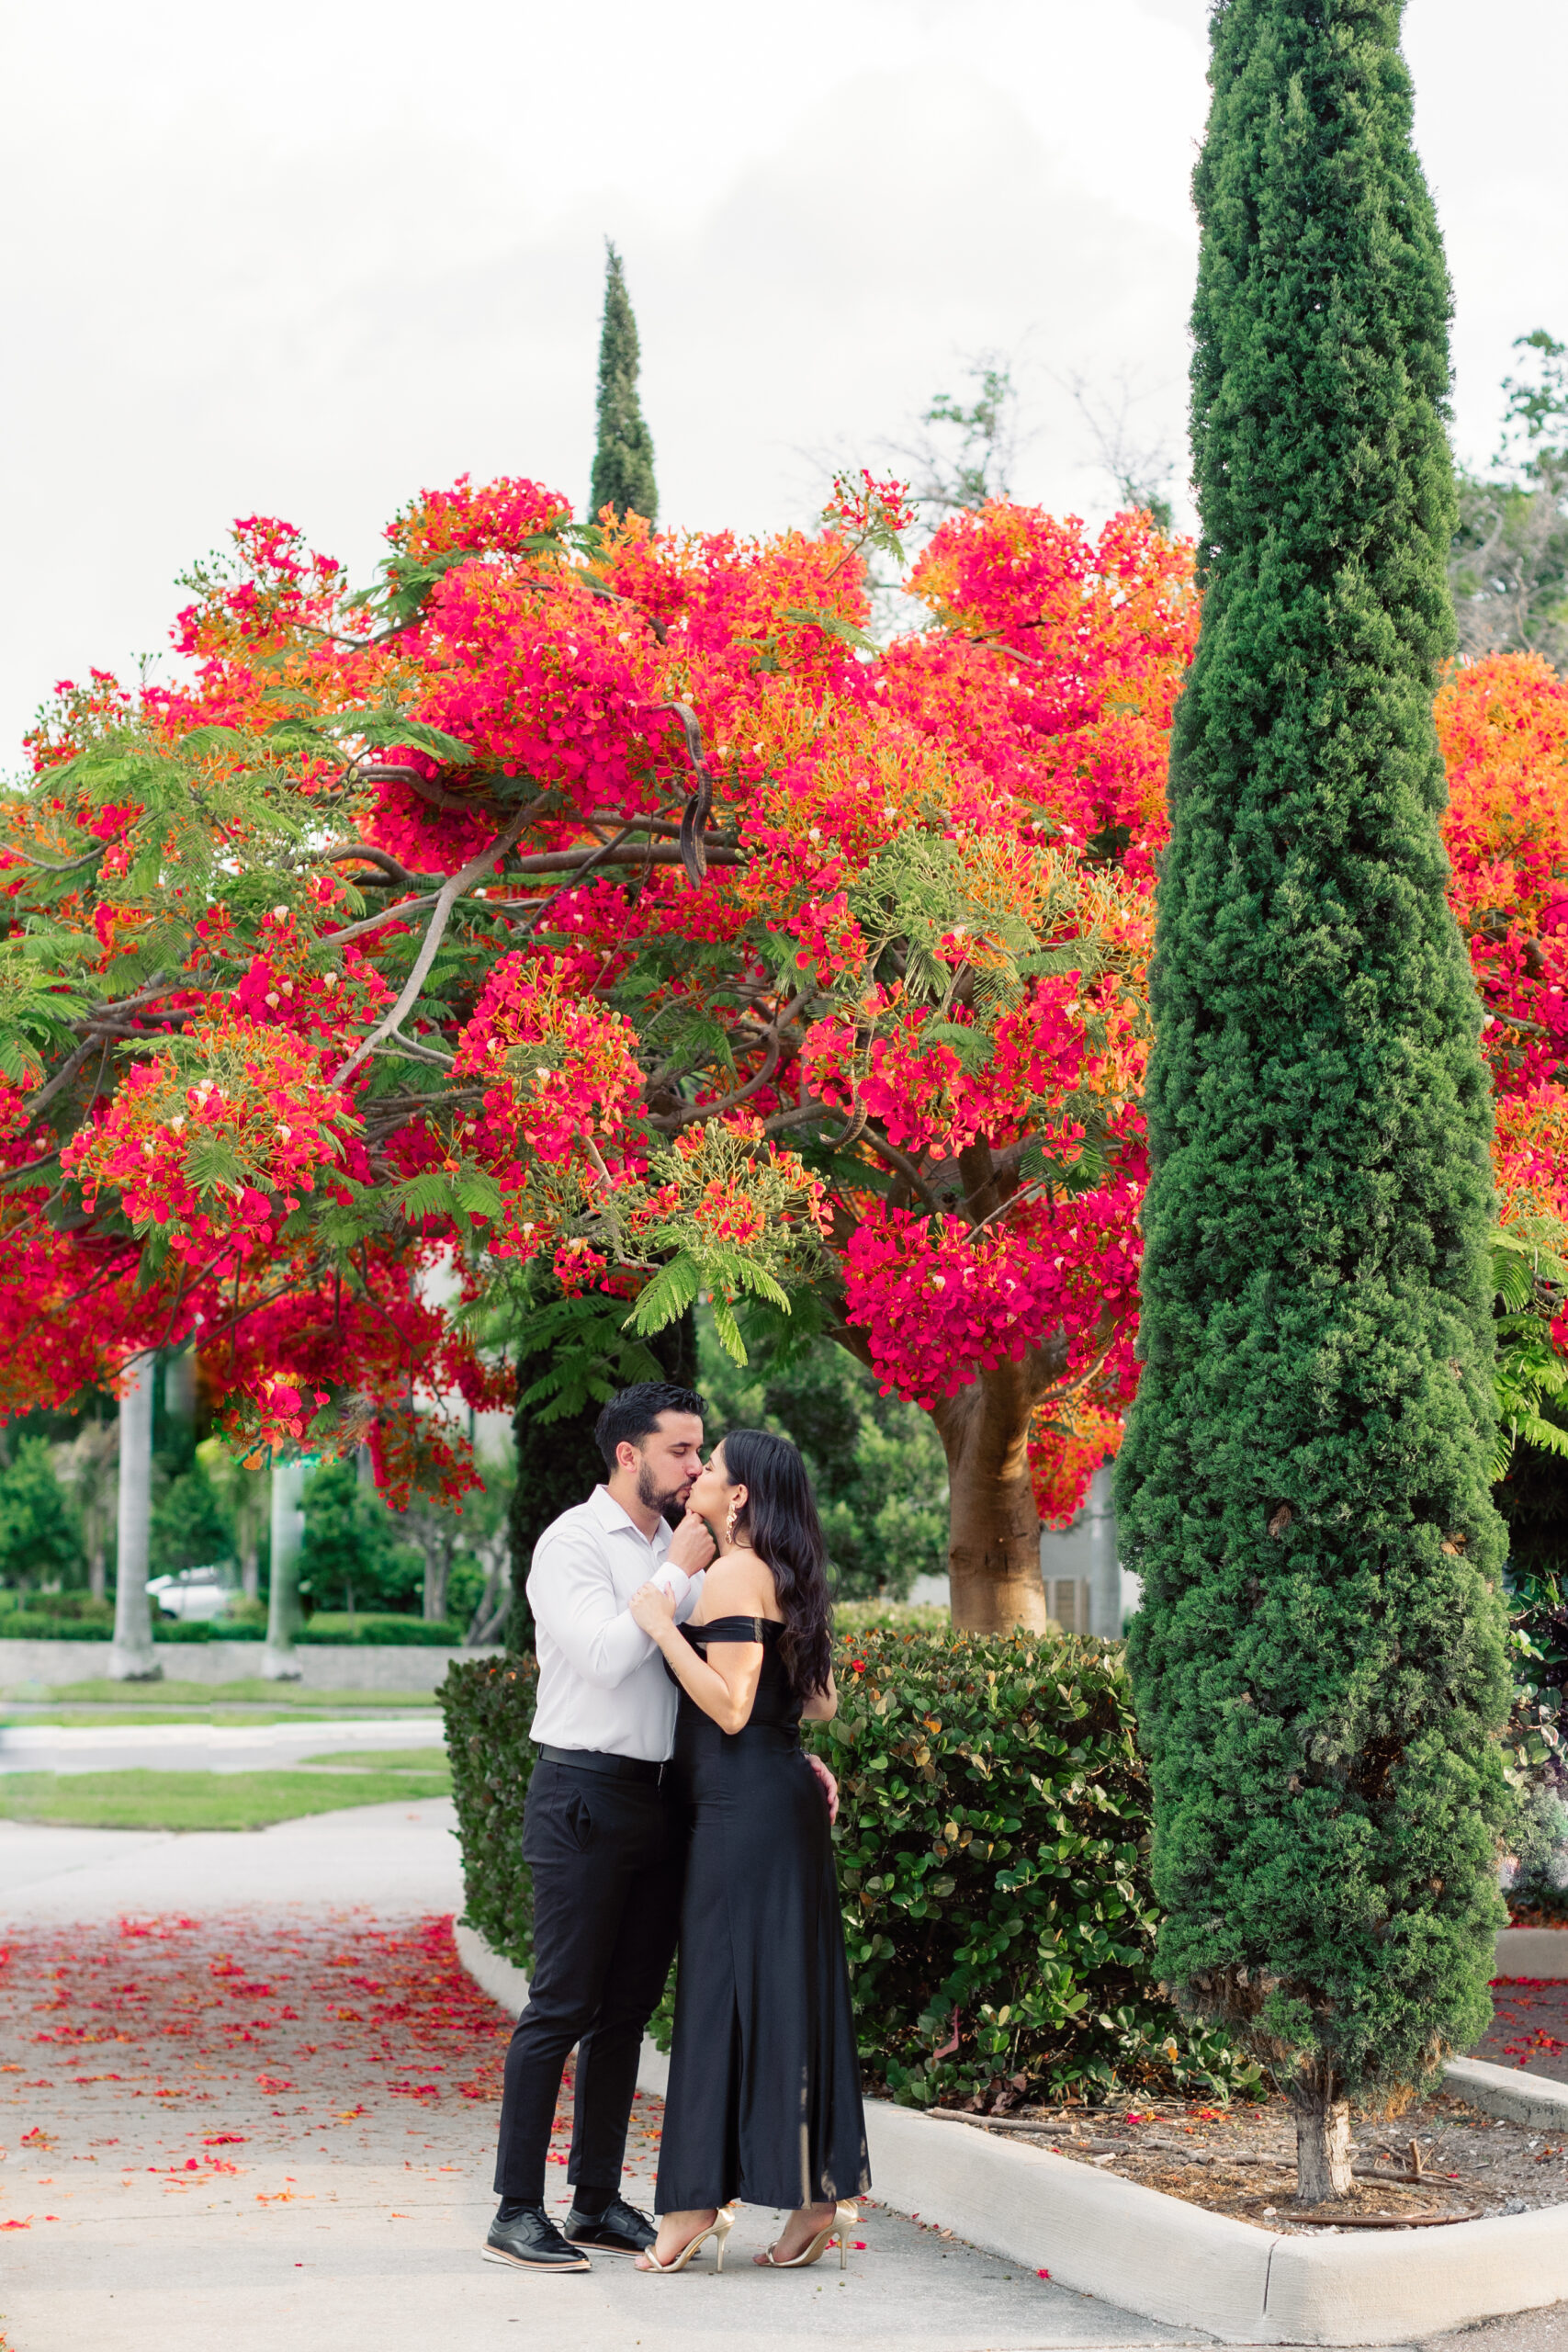 Romantic couple sharing a kiss under a blossoming tree with lush flowers in full bloom, Tampa, FL